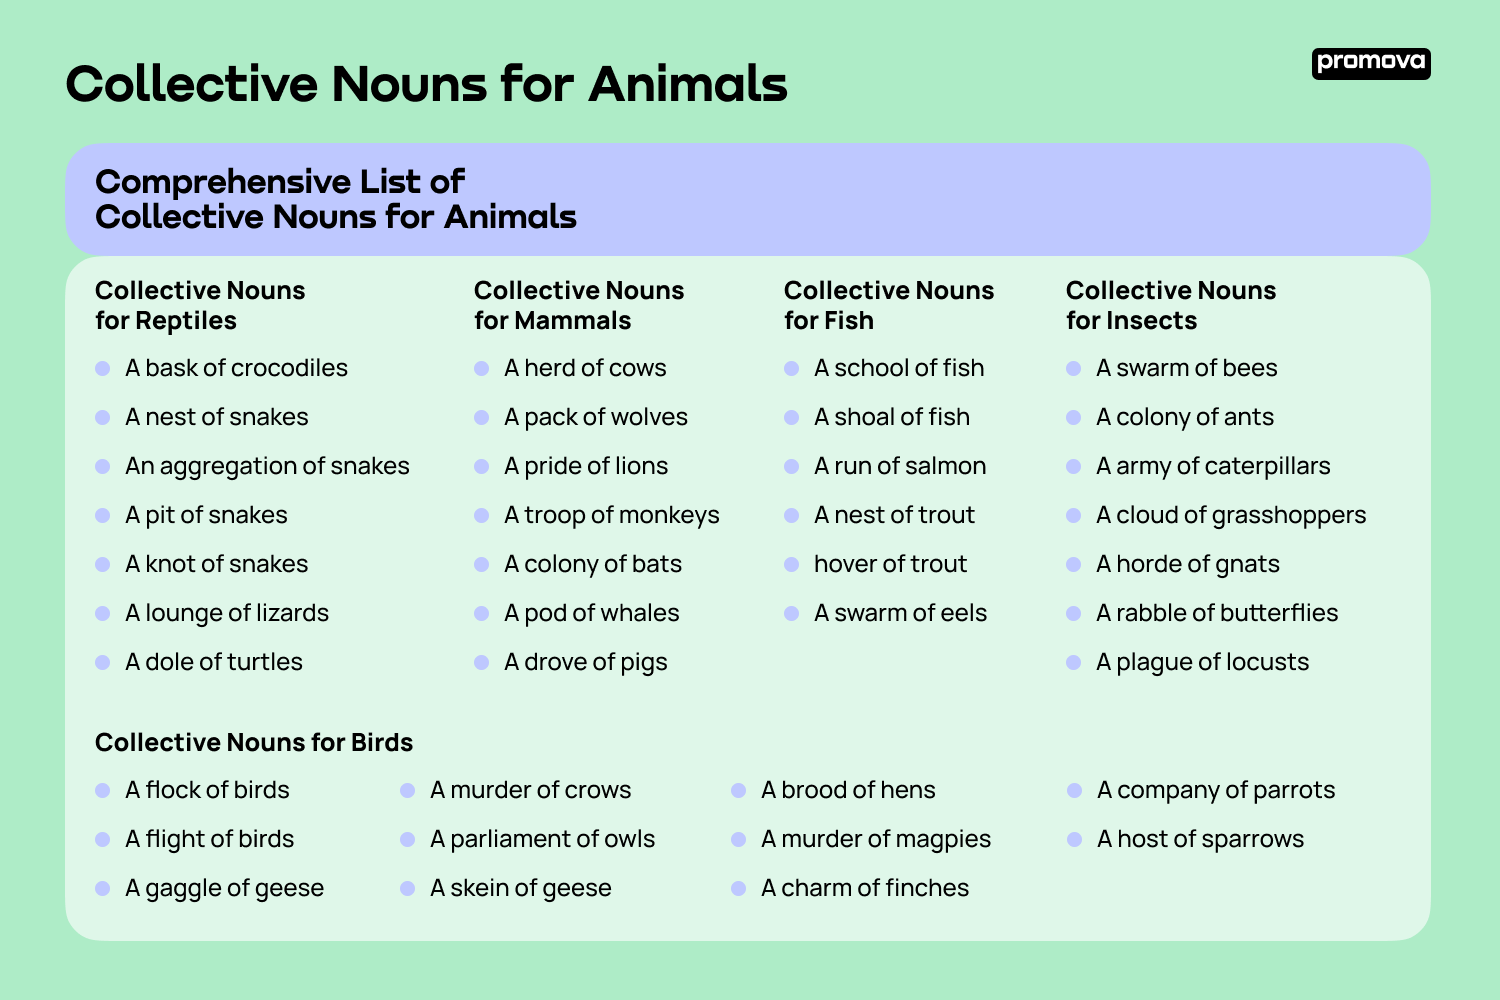 Comprehensive Guide of Collective Nouns for Animals